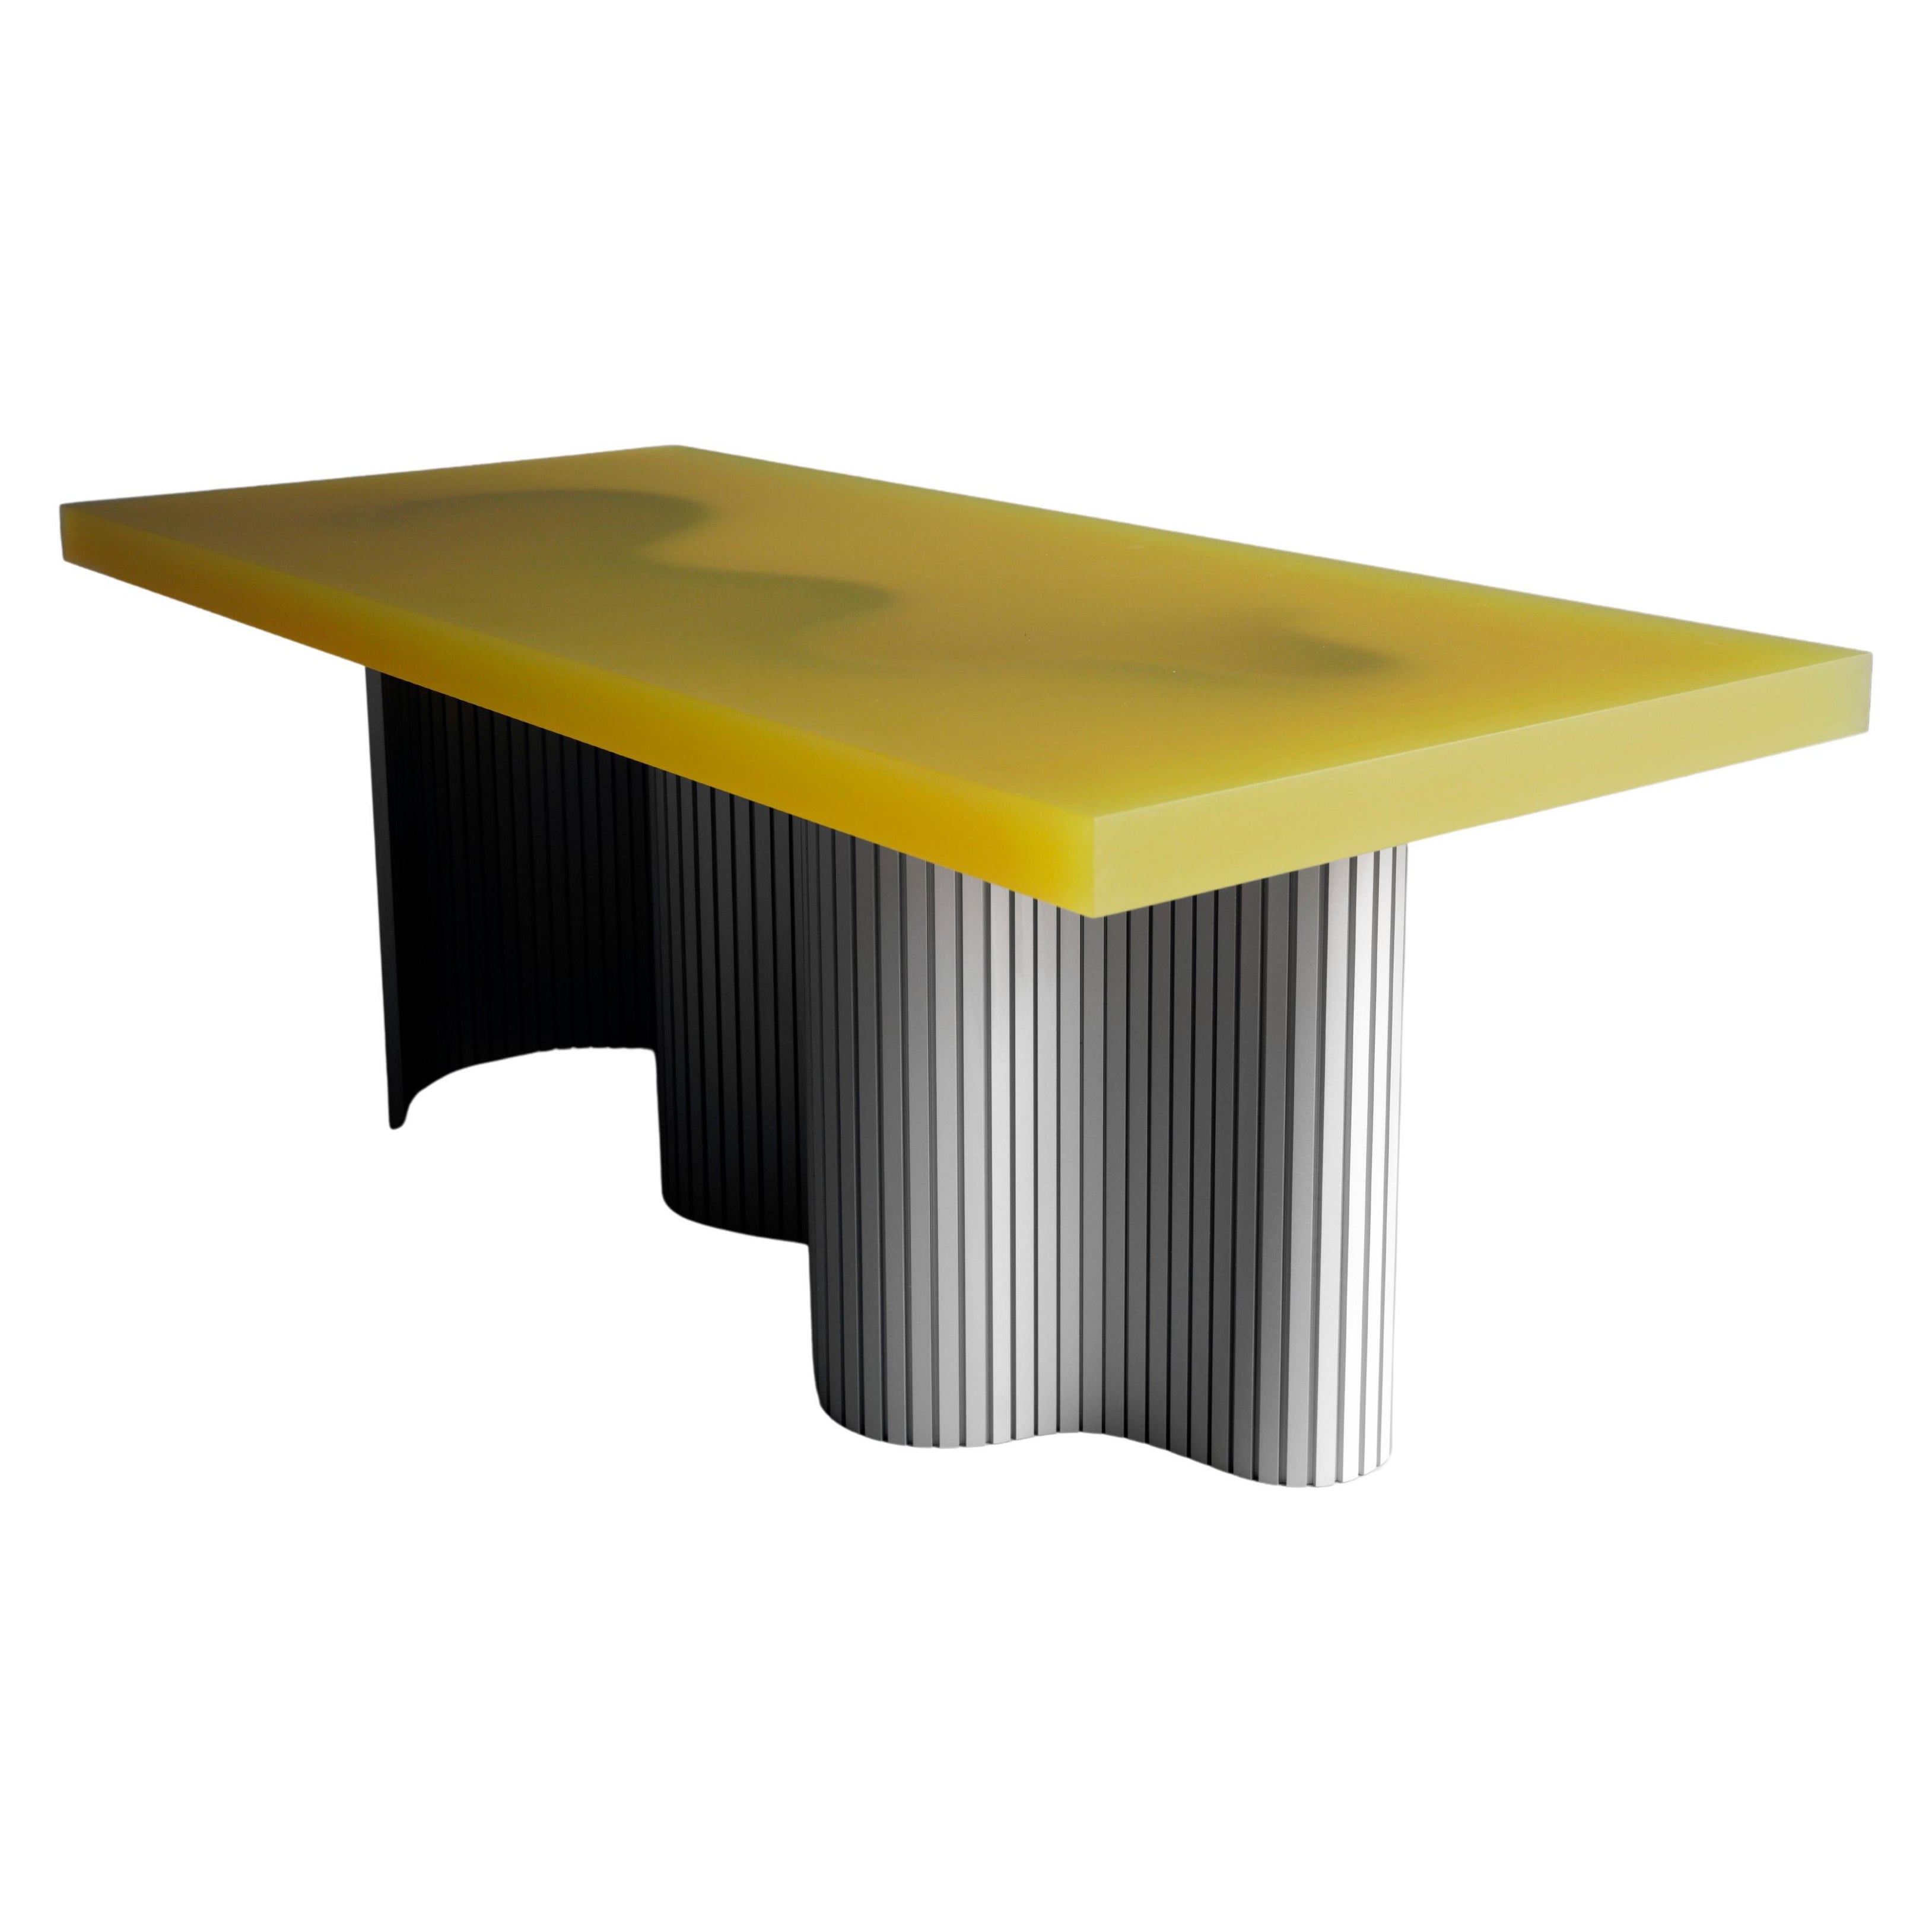 Contemporary Resin Coffee Table, Yellow Spine Table, Erik Olovsson For Sale